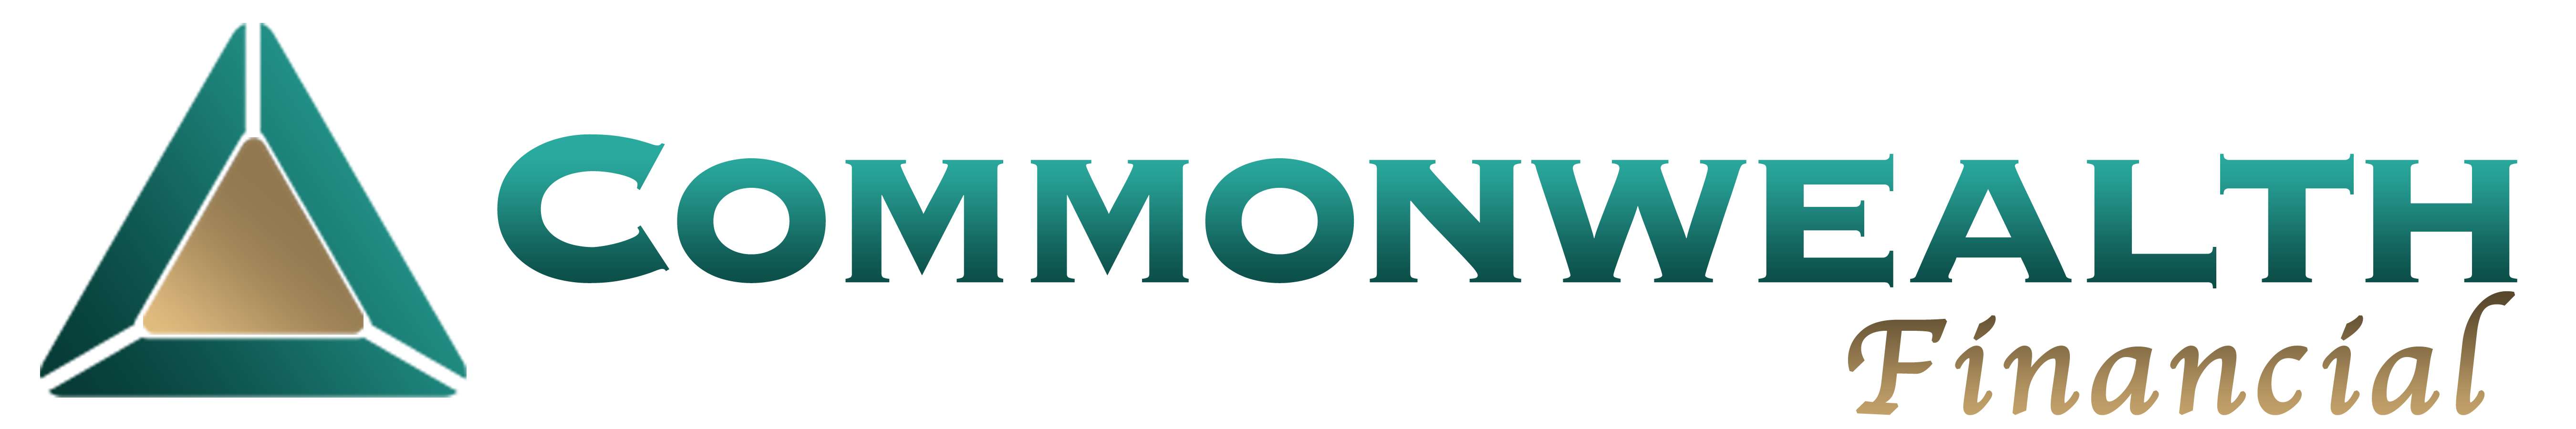 HIGH RESOLUTION logo-with-text